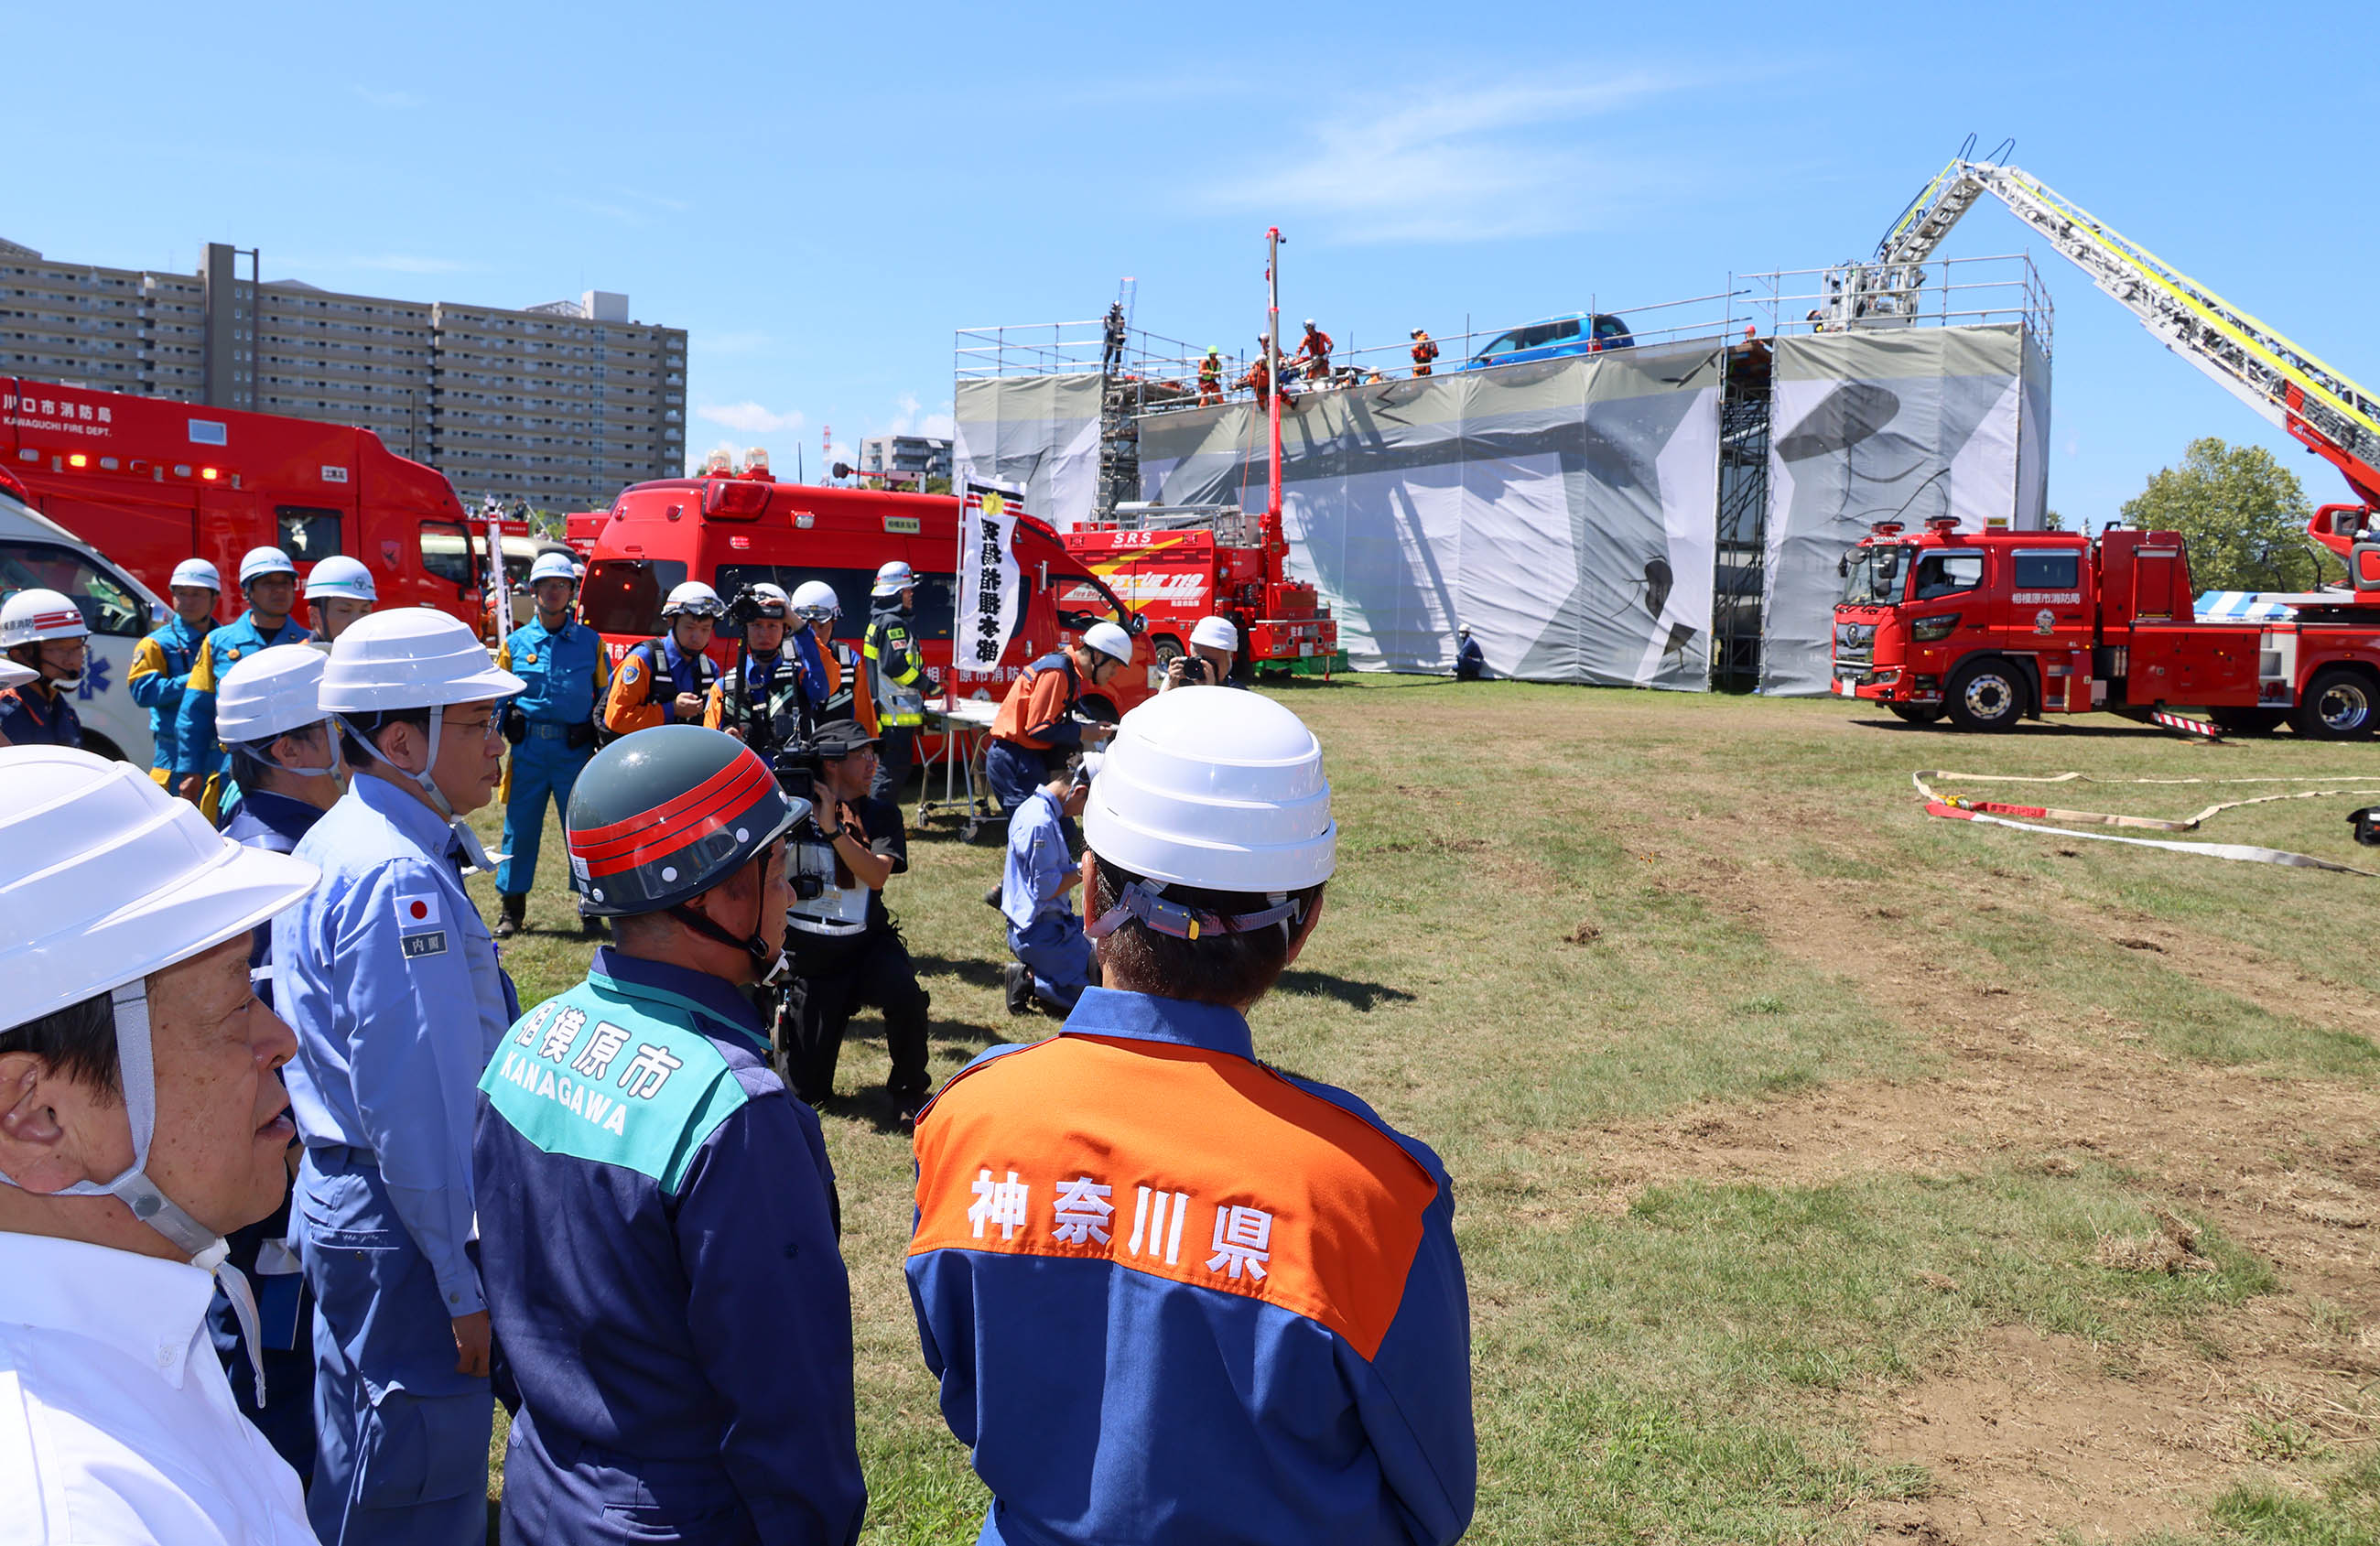 Prime Minister Kishida observing a rescue, first aid and fire drill (1)